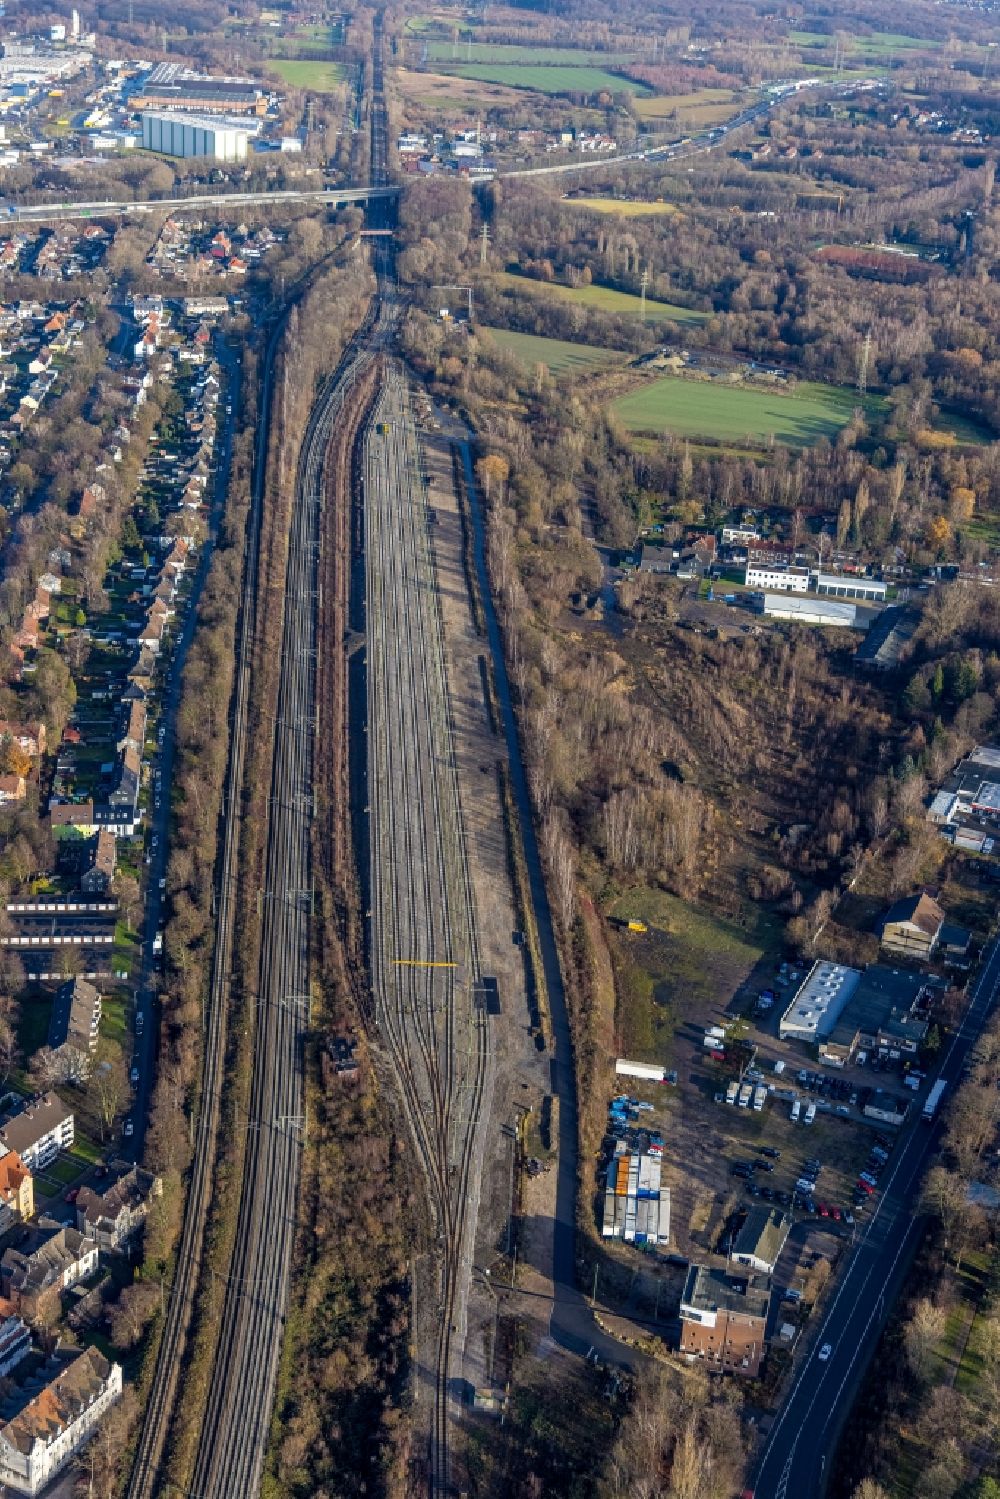 Herne from the bird's eye view: Aerial view of a railroad facility at Josefinenstrasse in the district of Boernig in Herne in the Ruhr area in the German state of North Rhine-Westphalia, Germany